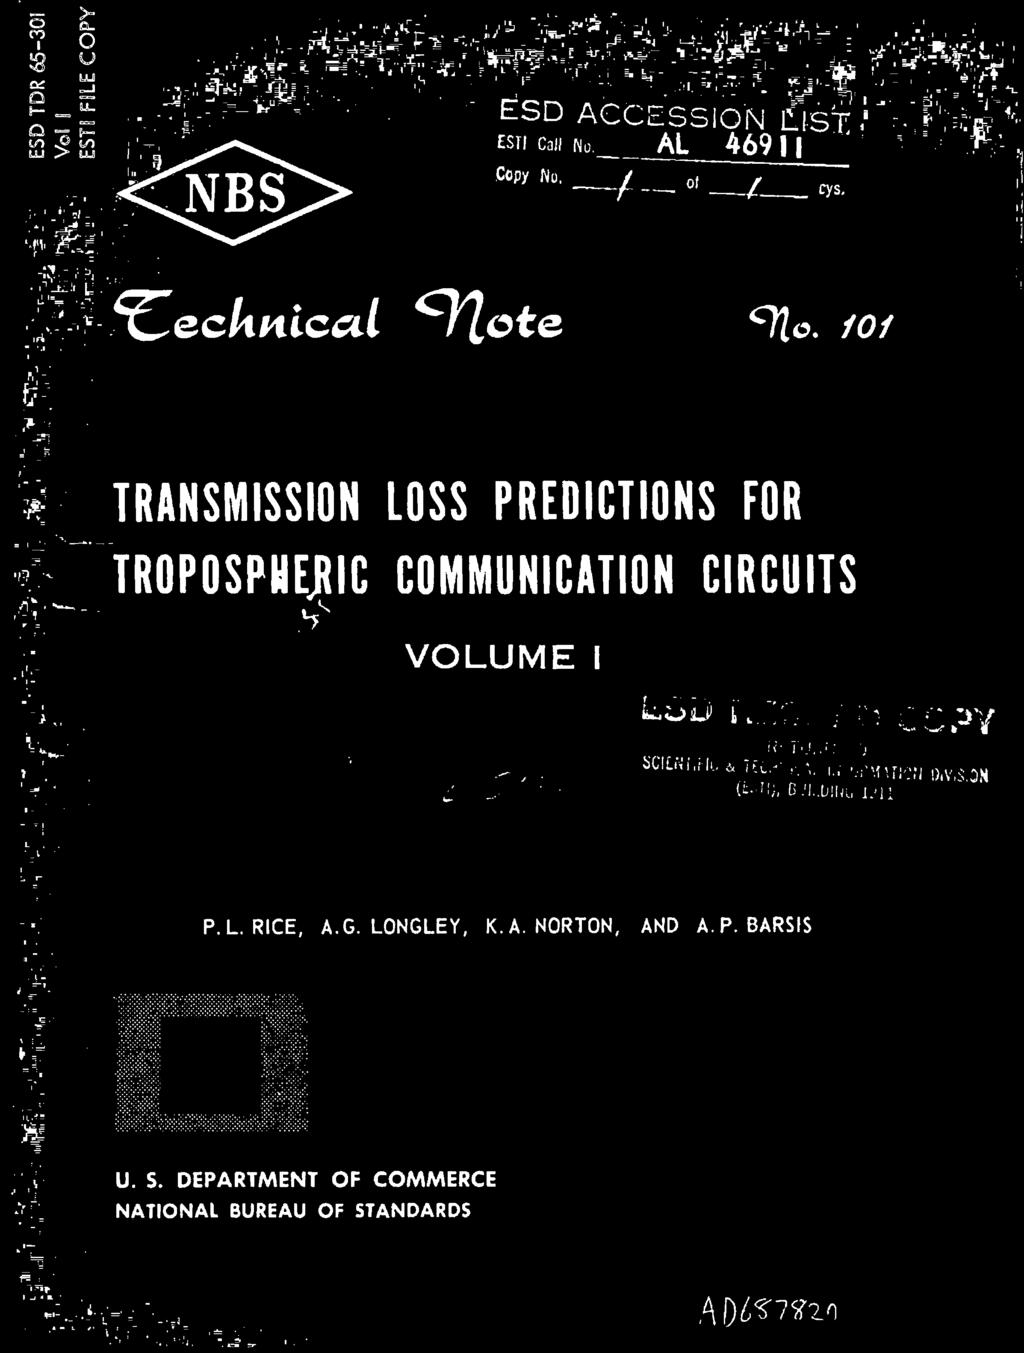 // TRANSMISSION LOSS PREDICTIONS FOR TROPOSPUERIC COMMUNICATION CIRCUITS ^ VOLUME I w.. LüO L.